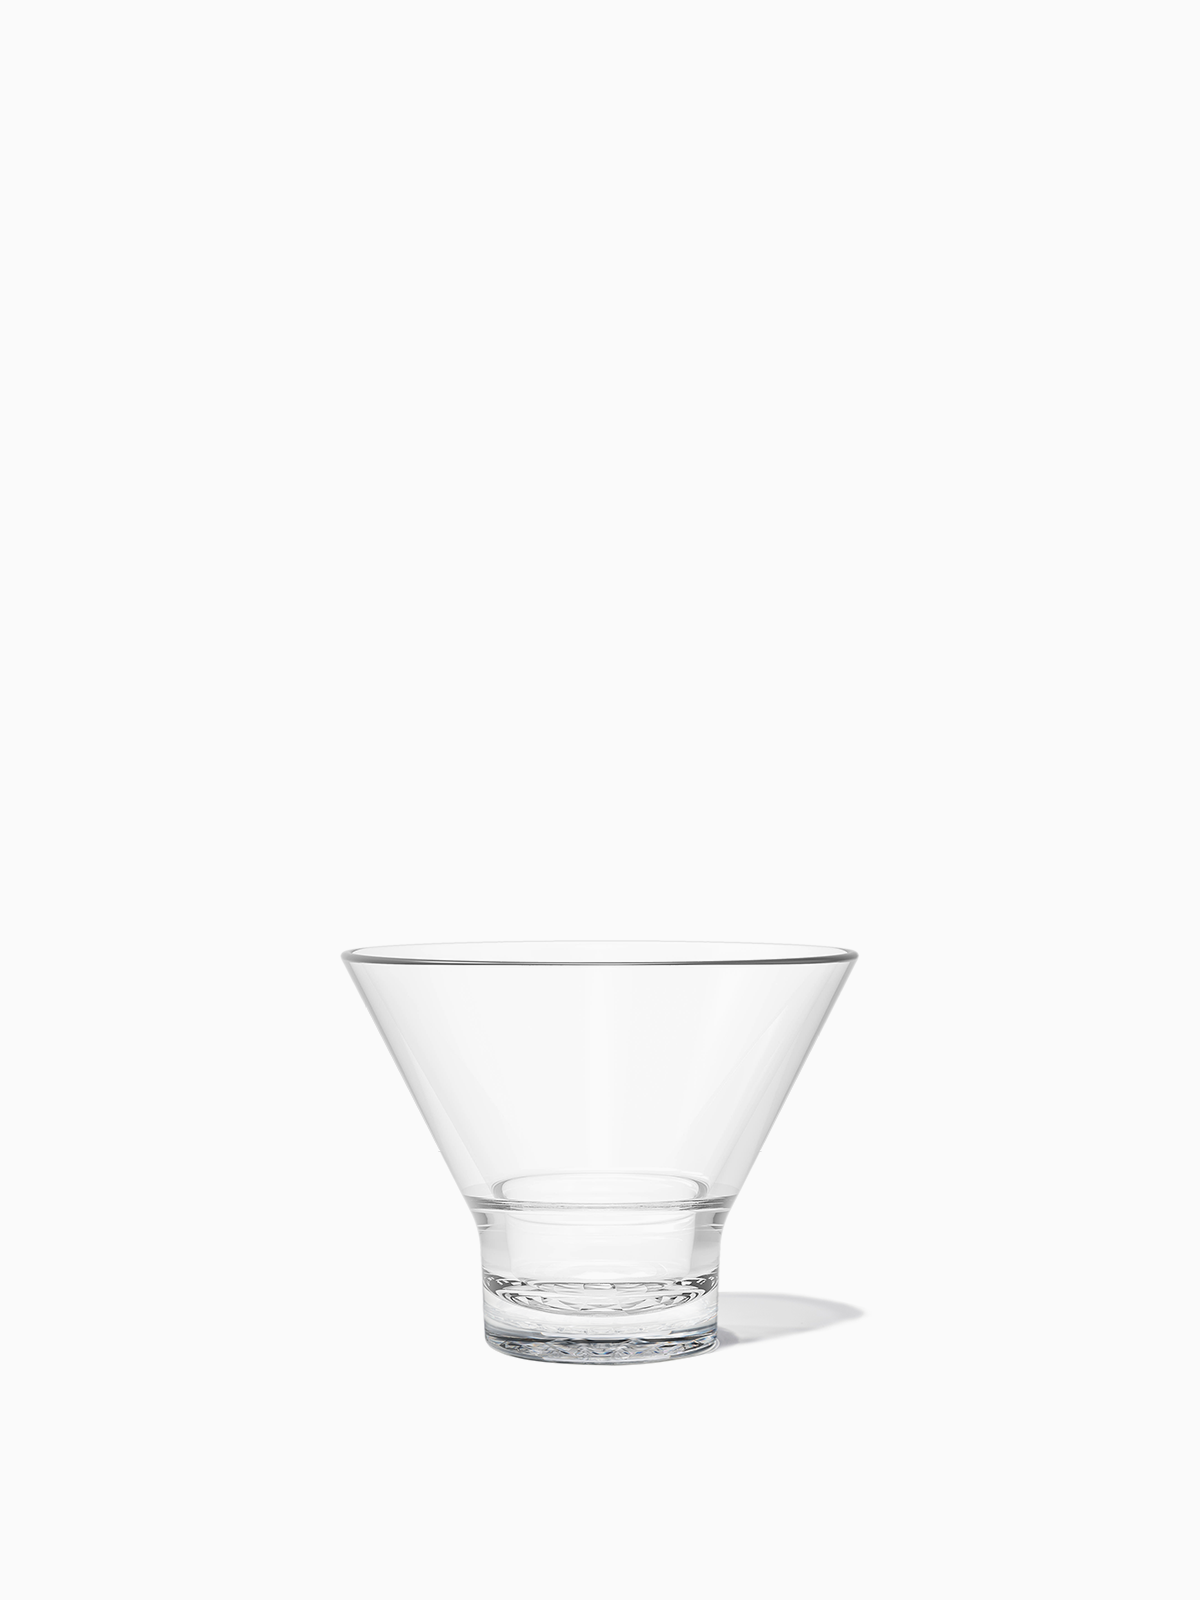 True Party Disposable Plastic Martini Glasses - Stemmed Clear Cocktail Cups  for Outdoors, Parties - 8oz Set of 12 